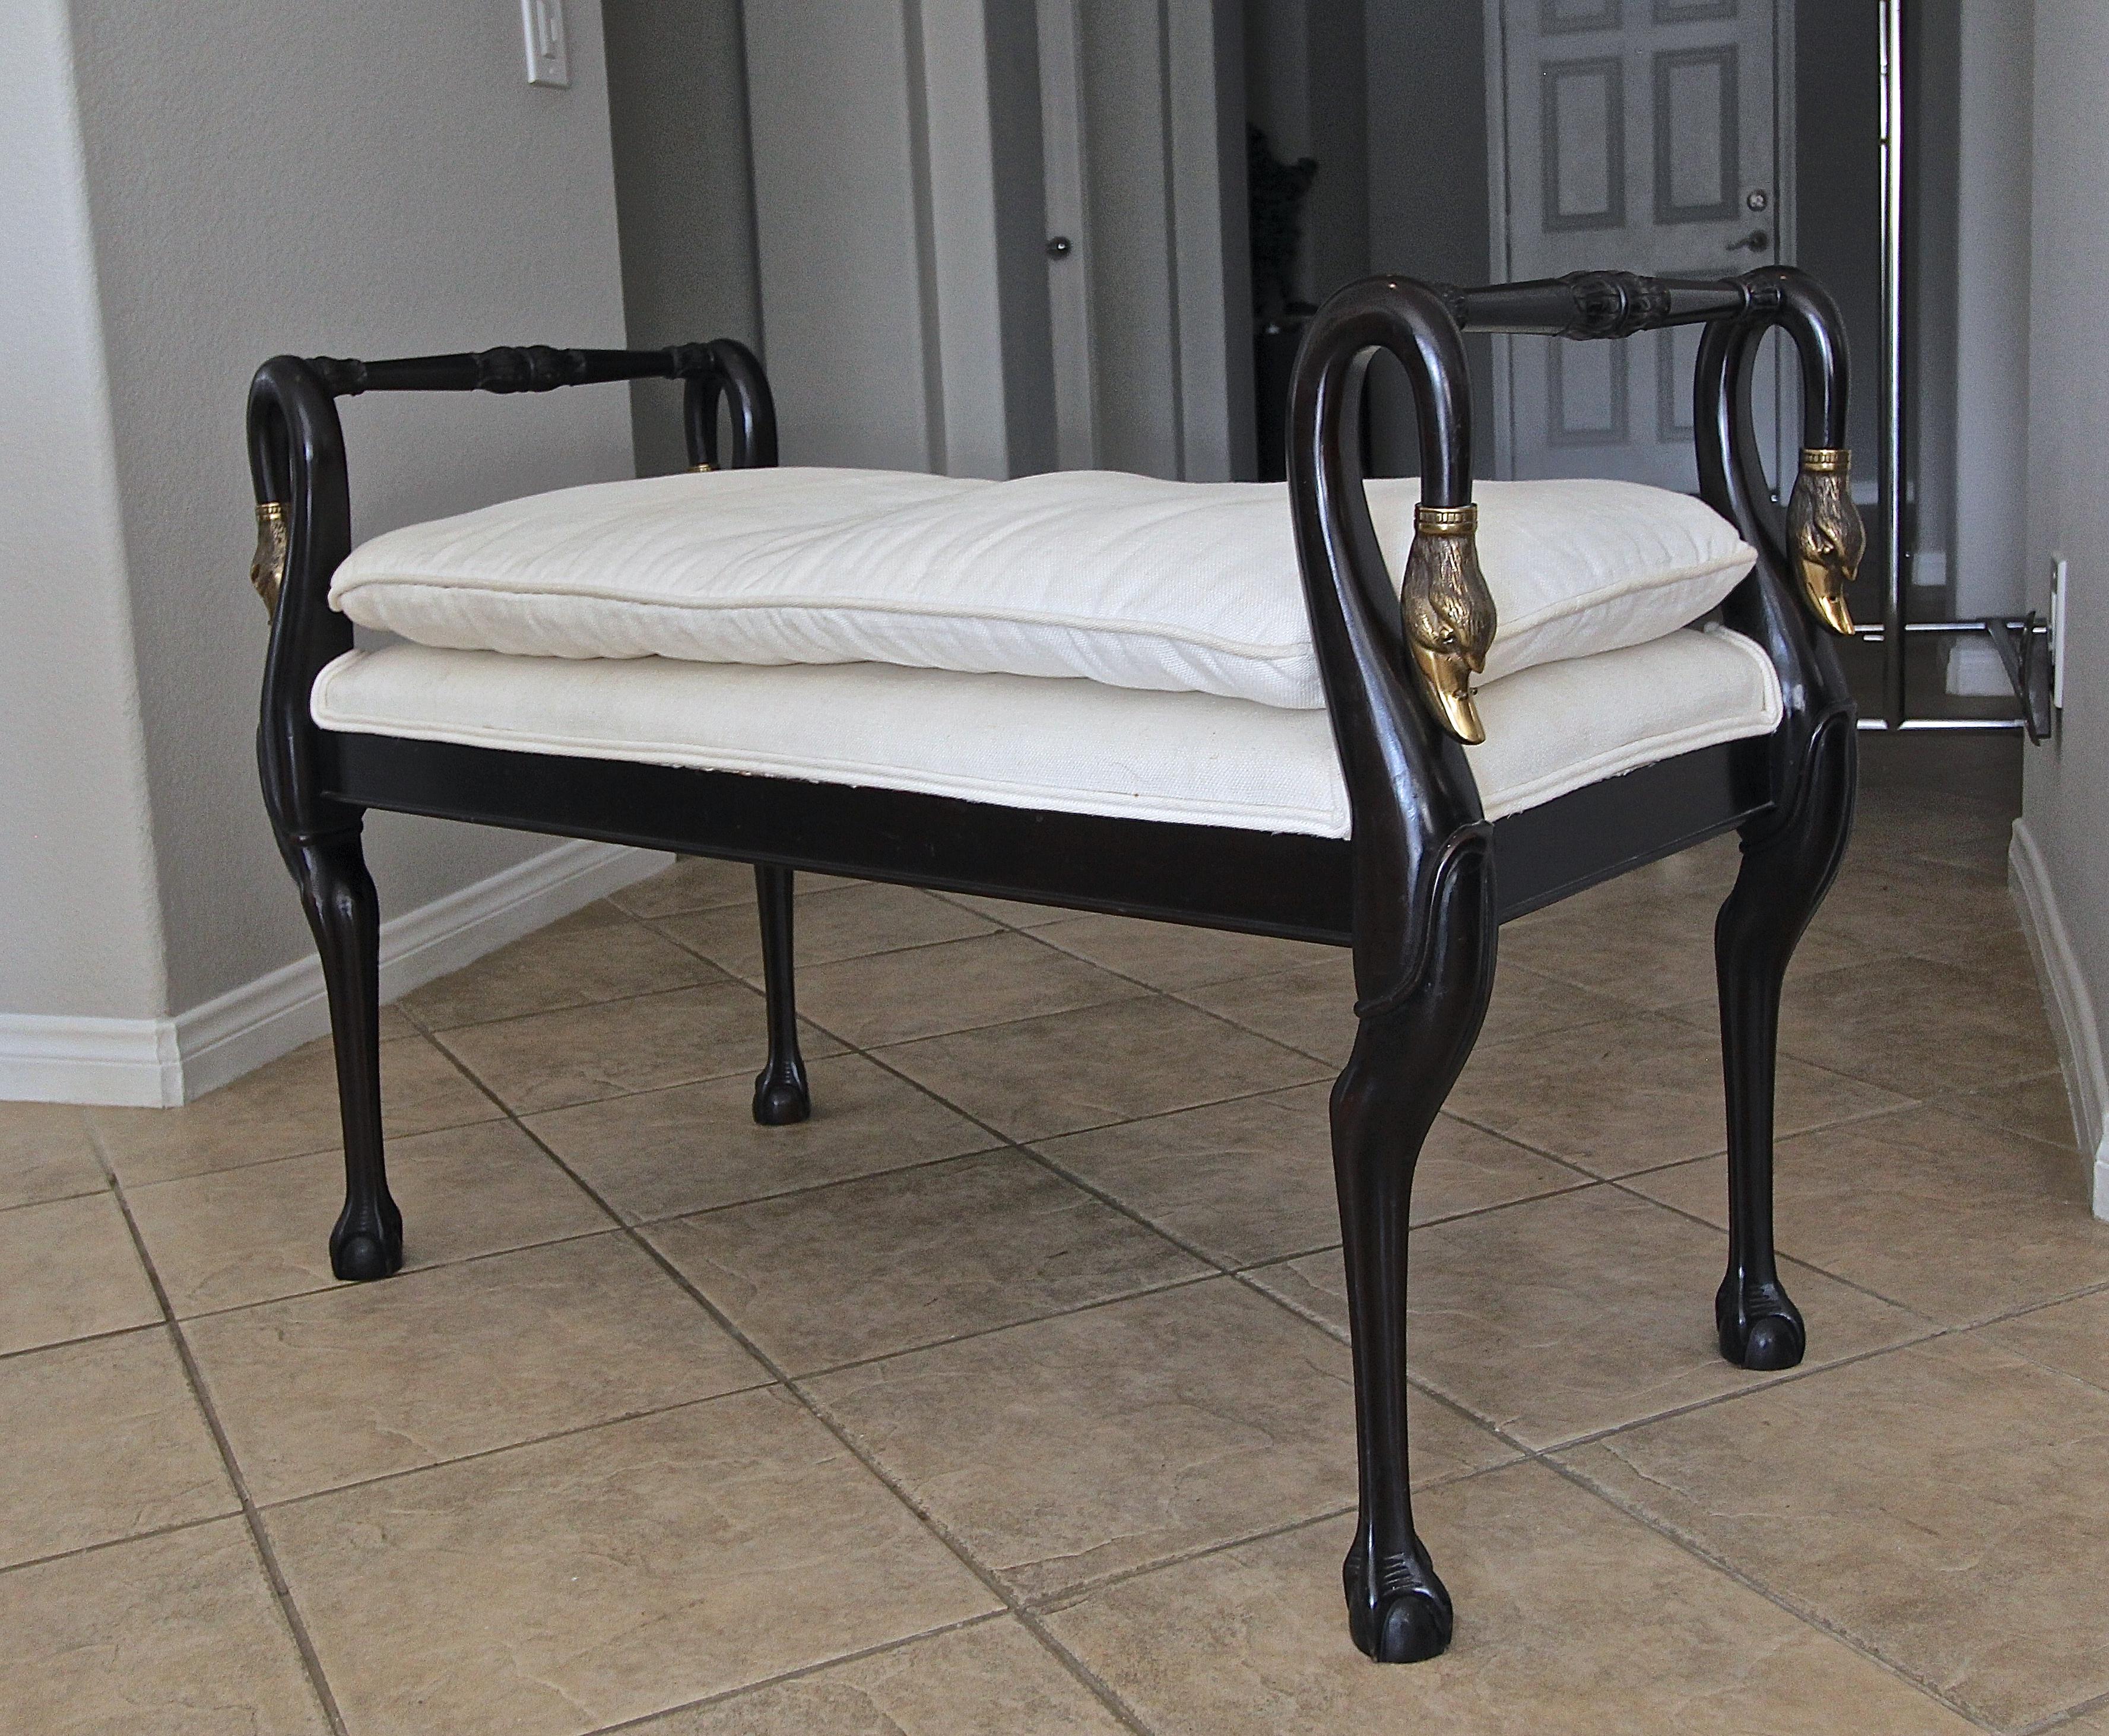 Directoire style wood and brass bench with swan head mounts and paw feet motif. Handmade made with carved legs and armrests. Wood finish is an ebony (very dark brown) and is upholstered in a white canvas textured fabric, top cushion is removable. 